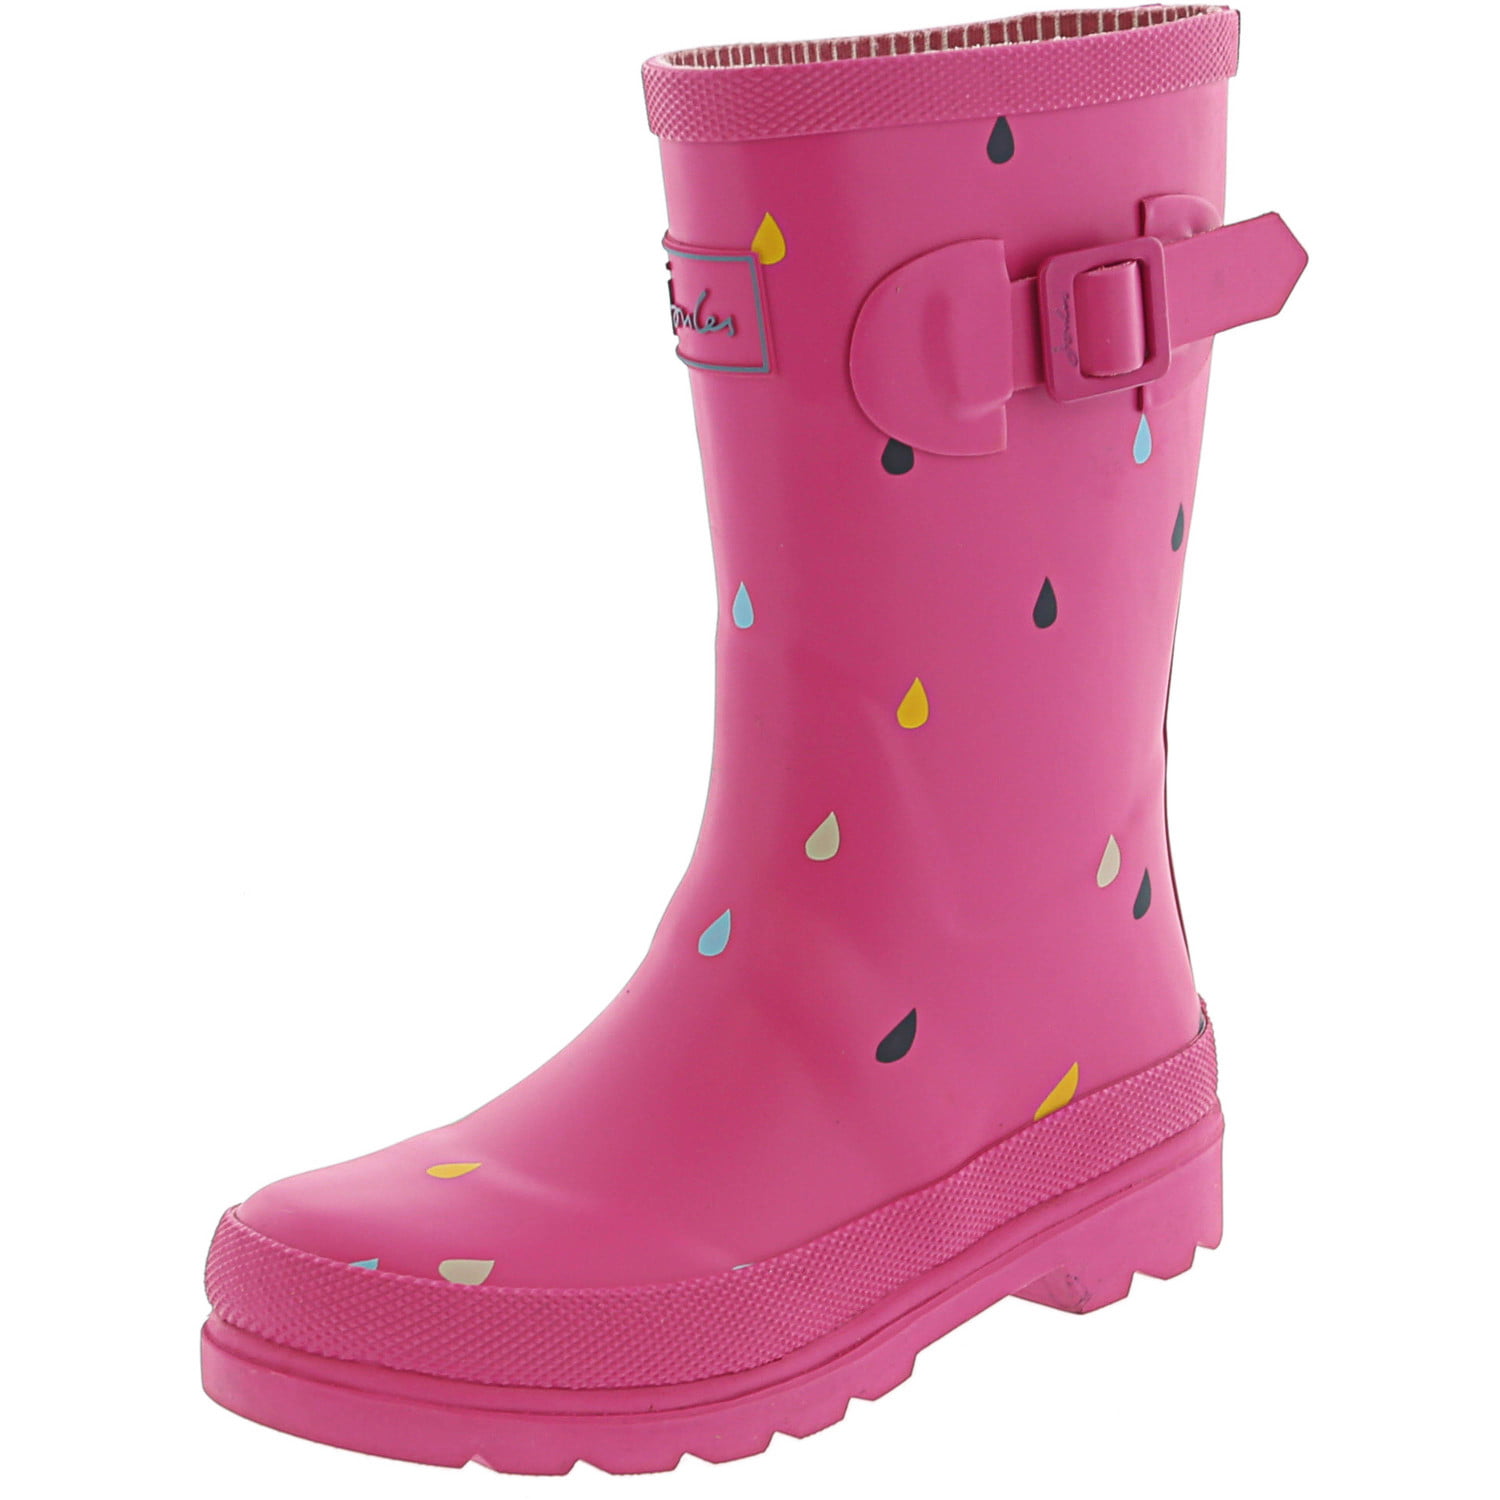 Joules Boy's Jnr Welly Print Mid Calf Boot